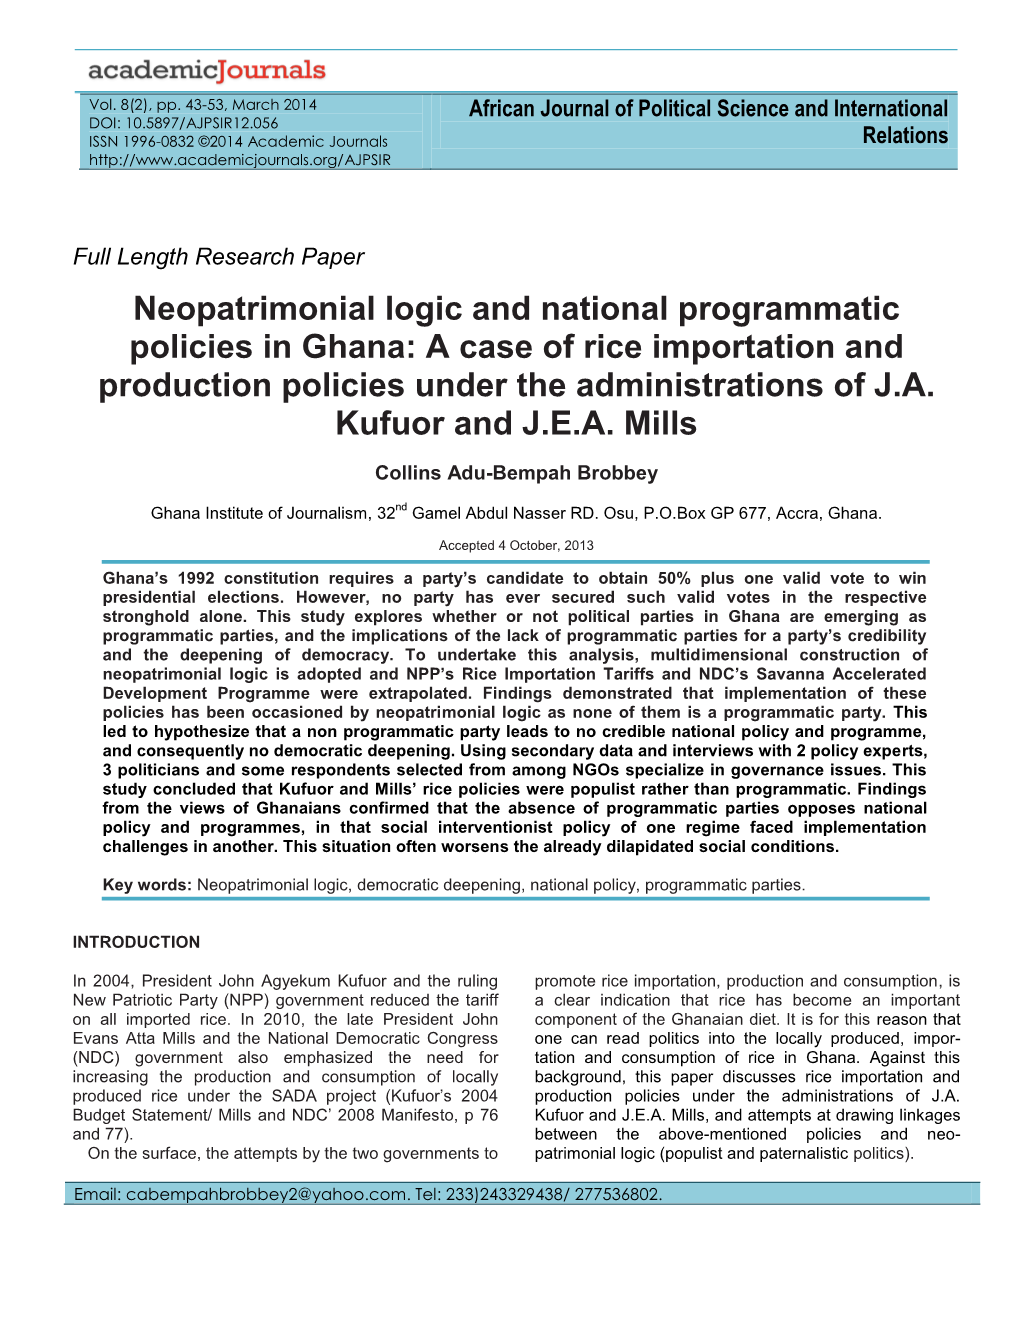 Neopatrimonial Logic and National Programmatic Policies in Ghana: a Case of Rice Importation and Production Policies Under the Administrations of J.A